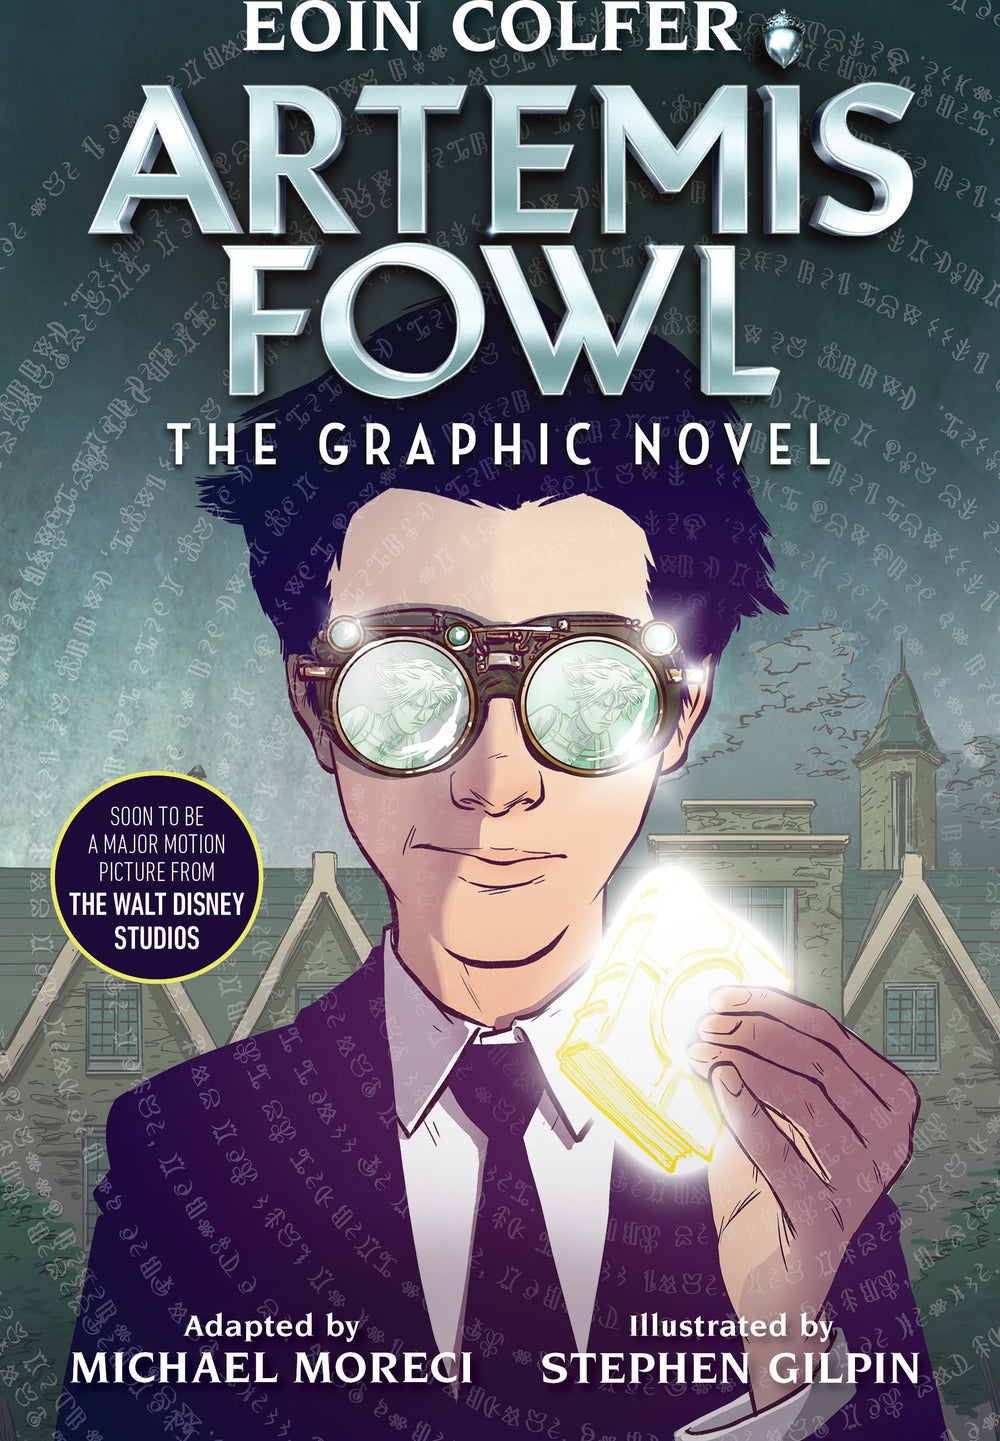 Eoin Colfer: Artemis Fowl: The Graphic Novel